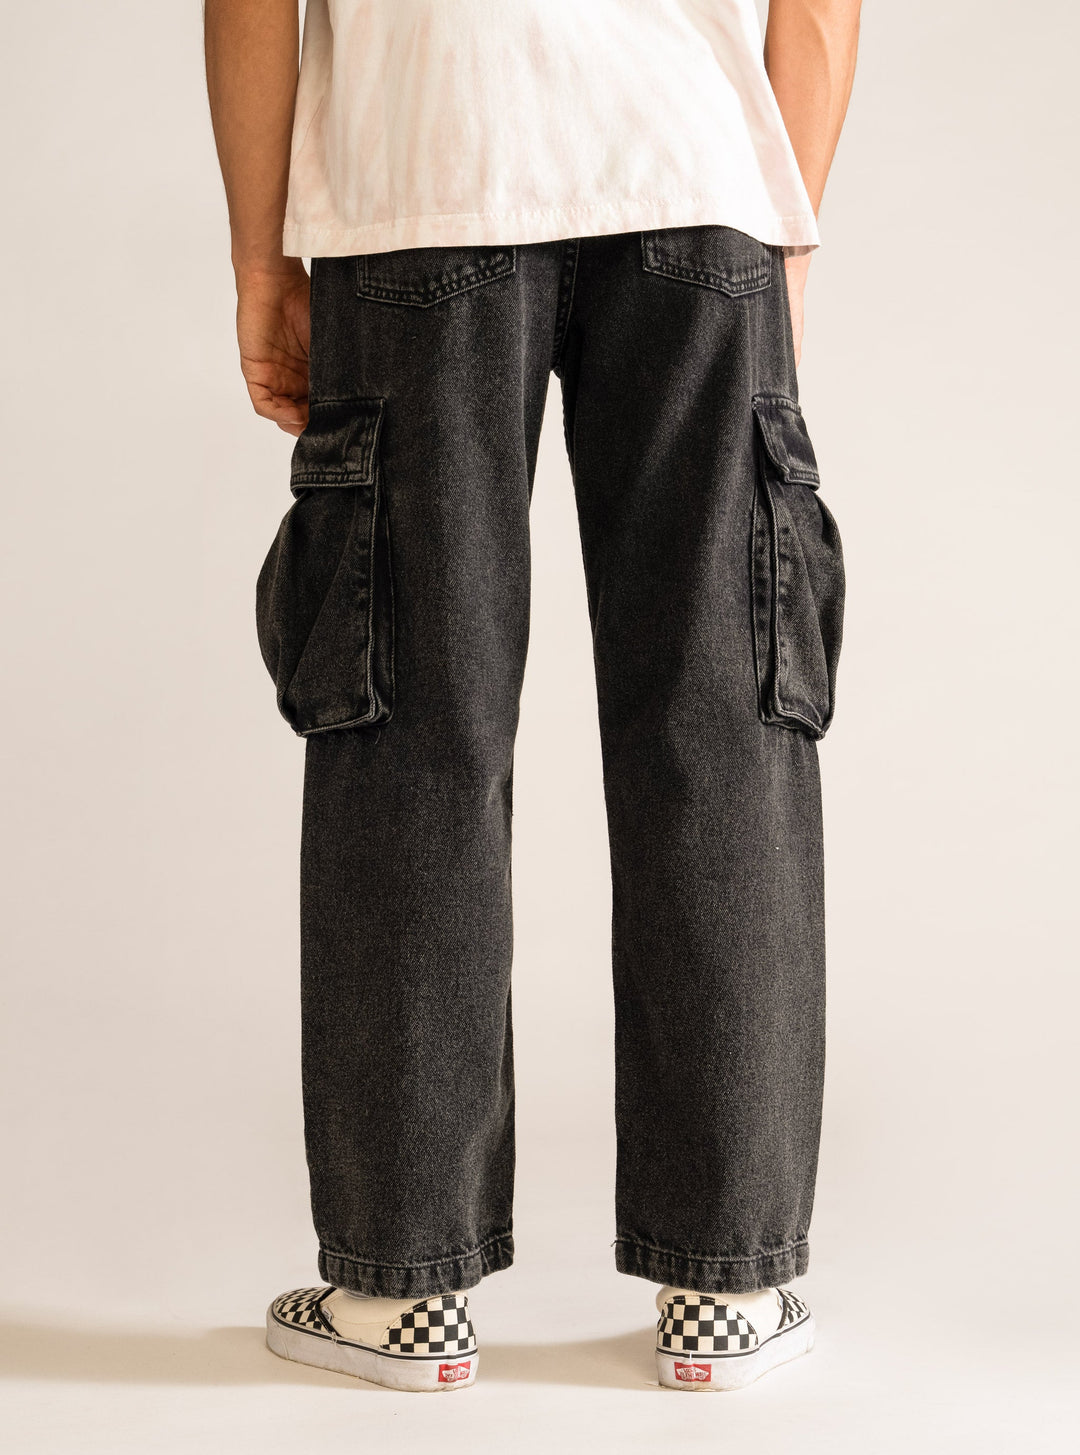 Taking Over Me Cargo Jeans, Black